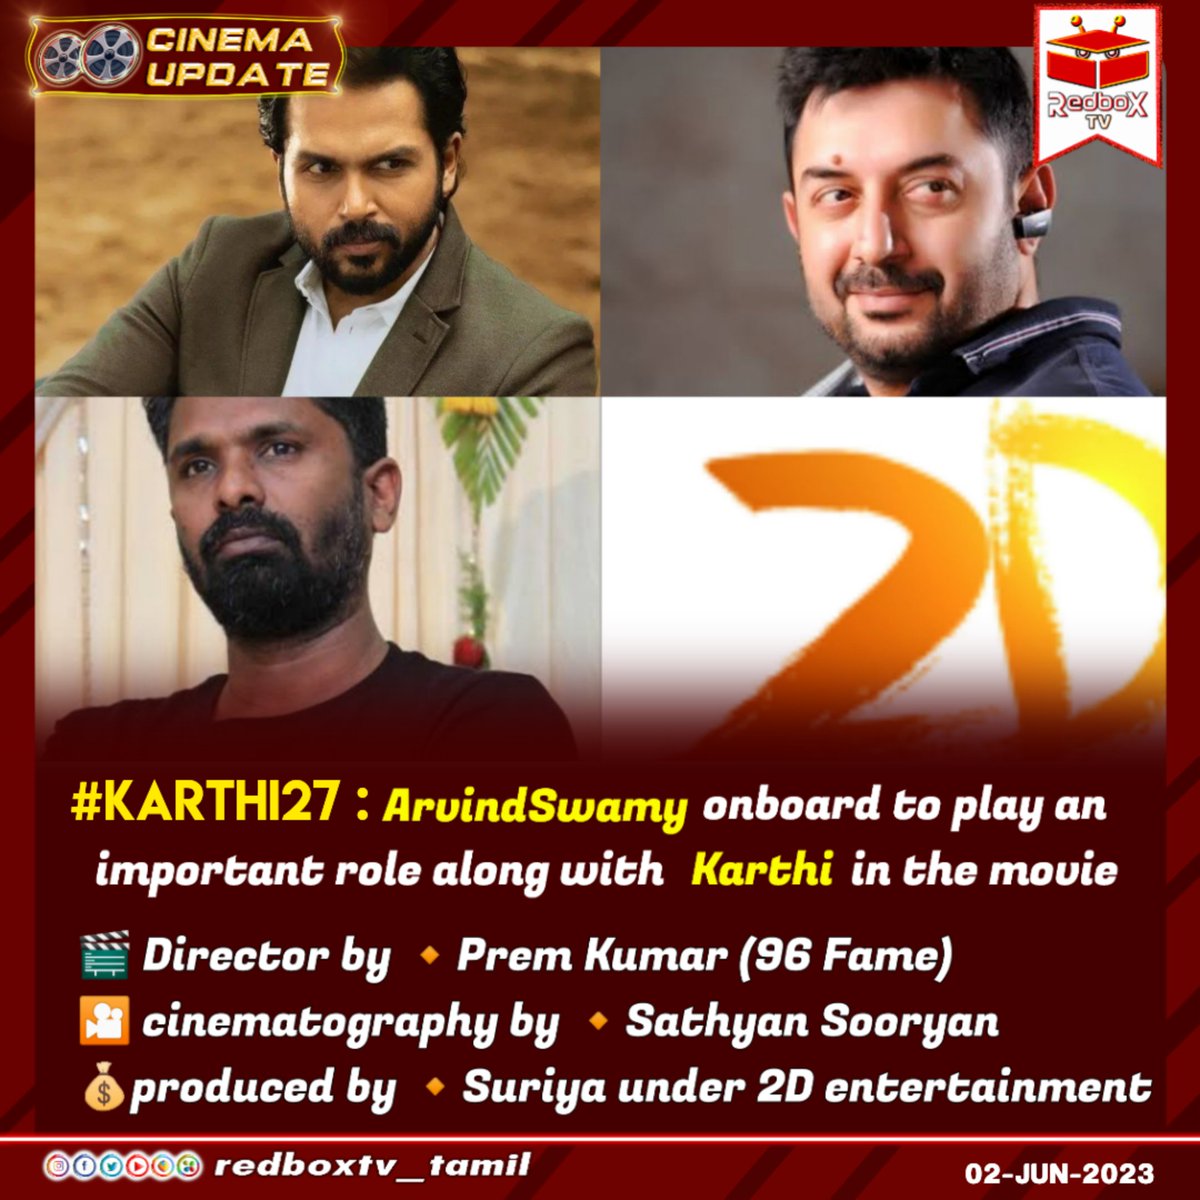 #Karthi27 : #ArvindSwamy onboard to play an important role along with #Karthi in the movie 
🎬 Director by #PremKumar (96 Fame)
🎦 Cinematography by #SathyanSooryan  
💰Produced by #Suriya under #2DEntertainment 
 
 🔸Based on Family Emotional bonding 

#RedboxTV | #RedboxTamil